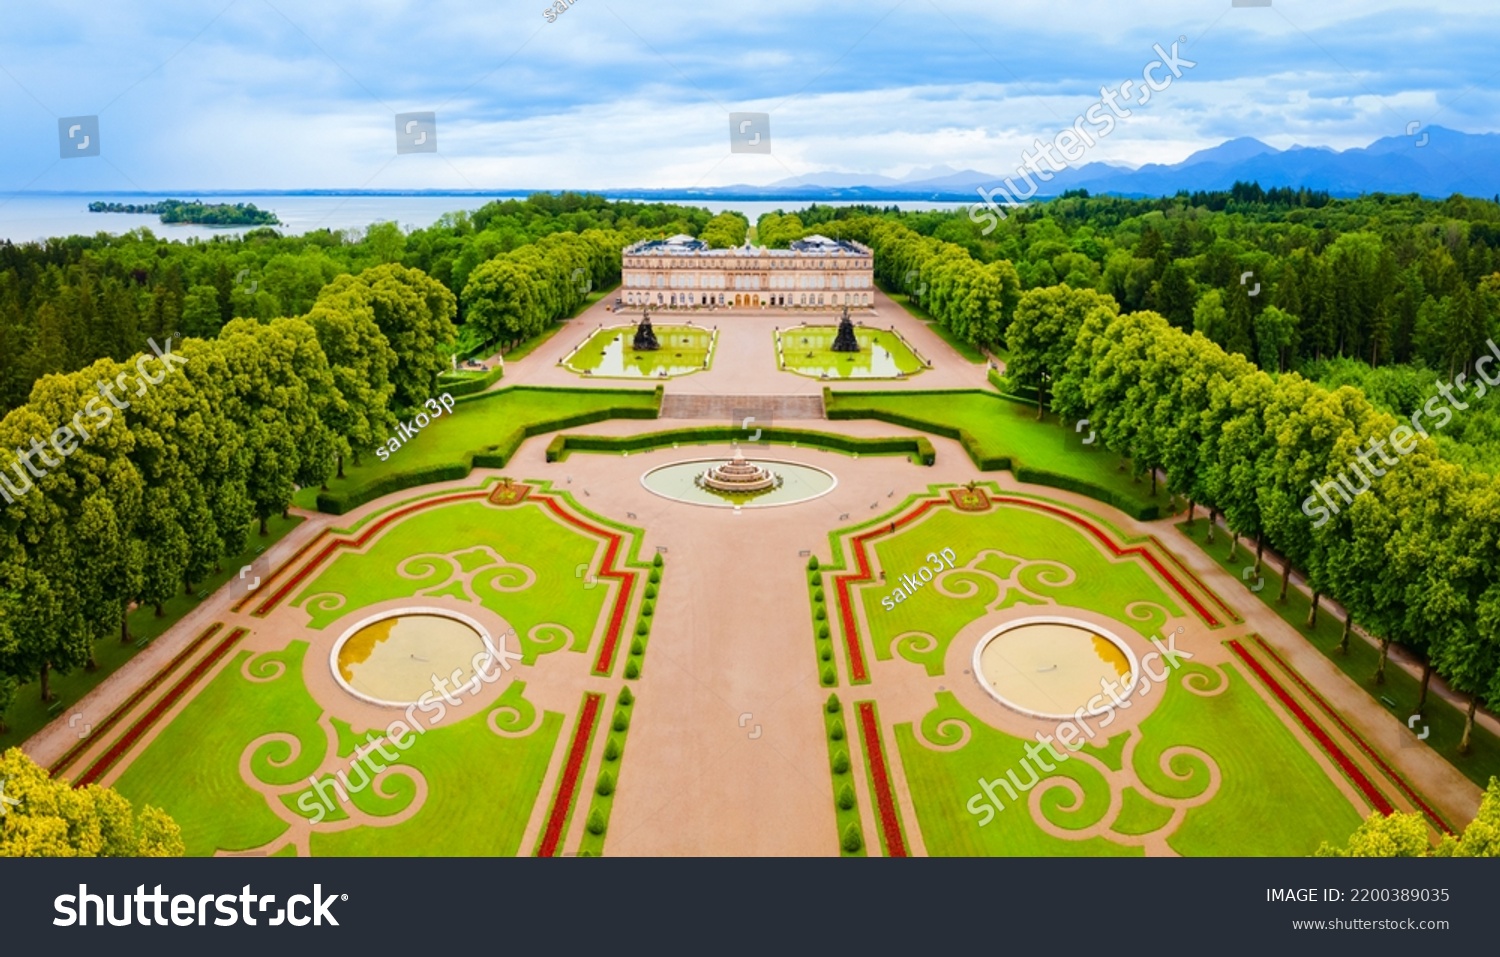 Herrenchiemsee Palace aerial panoramic view, it is a complex of royal buildings on Herreninsel, the largest island in the Chiemsee lake, in southern Bavaria, Germany #2200389035